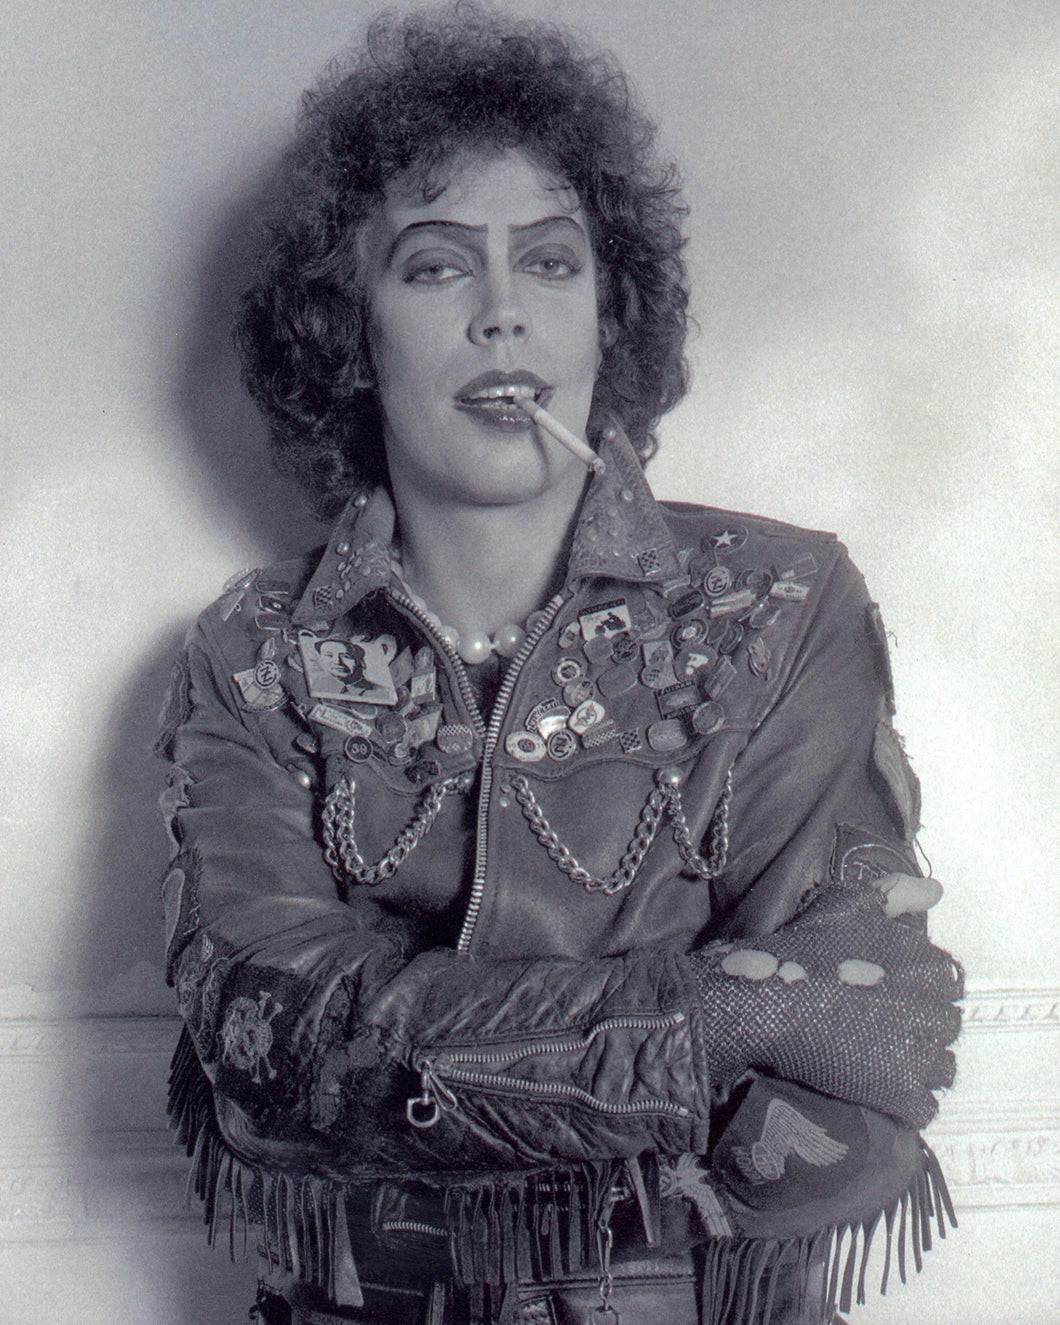 Tim Curry - Signed The Rocky Horror Picture Show Image #11 (8x10, 11x14)